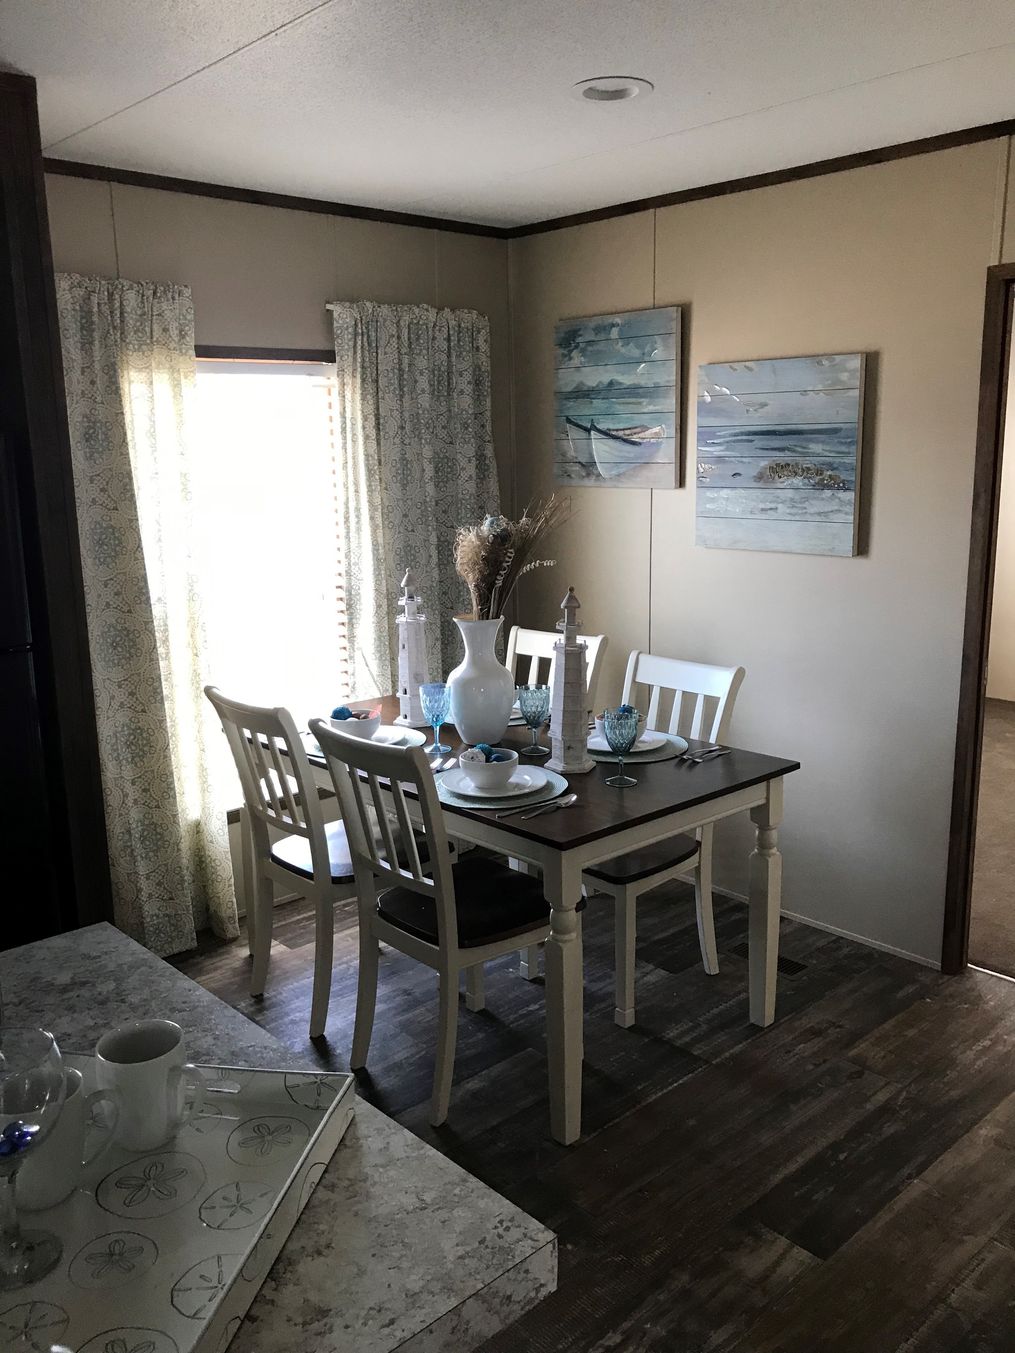 The THE ANNIVERSARY SPLASH Dining Room. This Manufactured Mobile Home features 3 bedrooms and 2 baths.